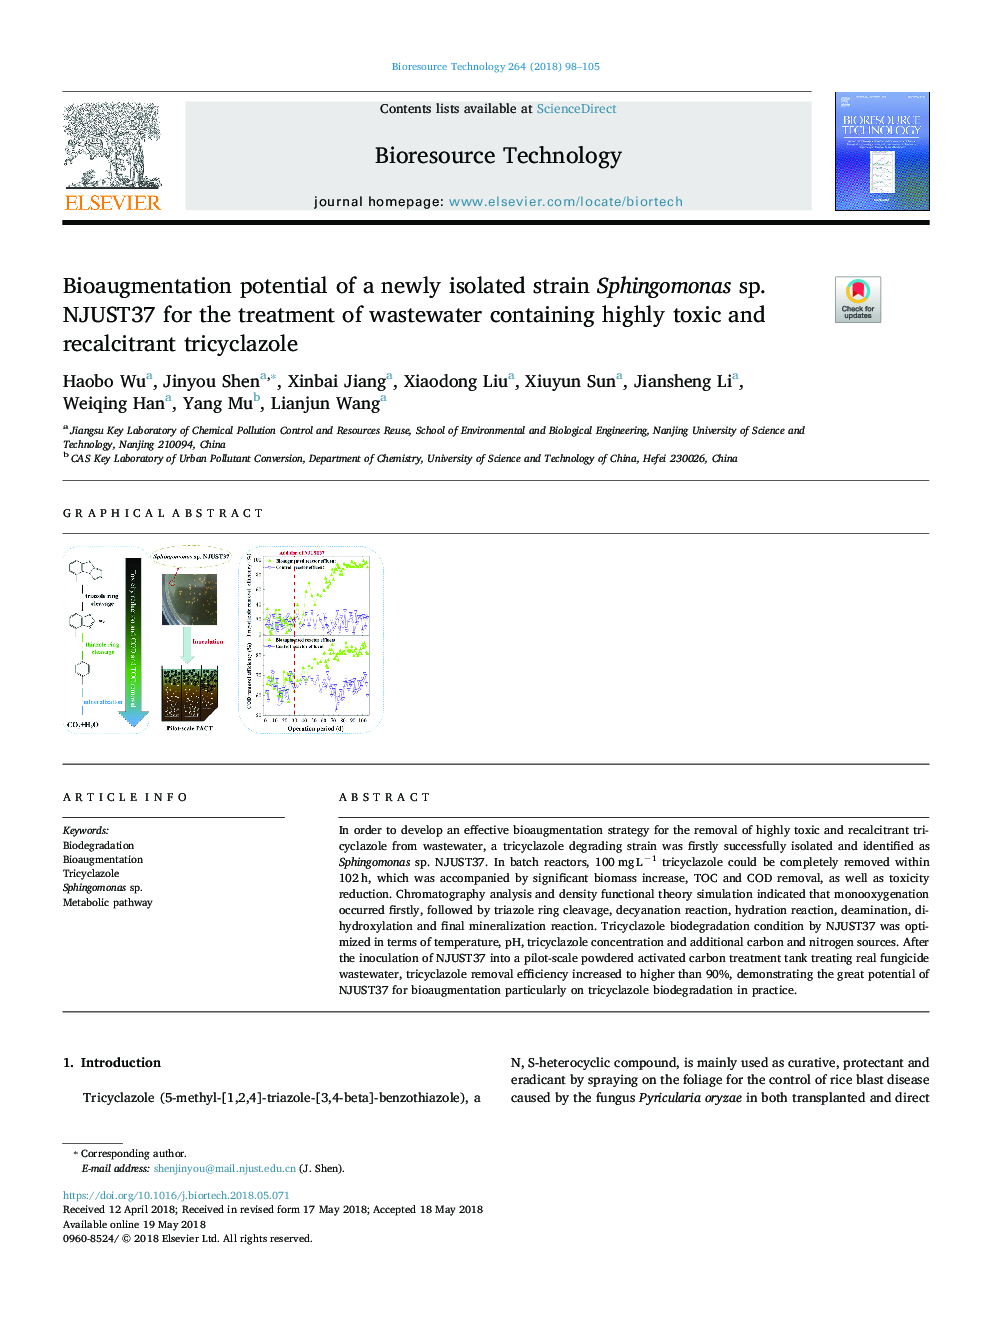 Bioaugmentation potential of a newly isolated strain Sphingomonas sp. NJUST37 for the treatment of wastewater containing highly toxic and recalcitrant tricyclazole